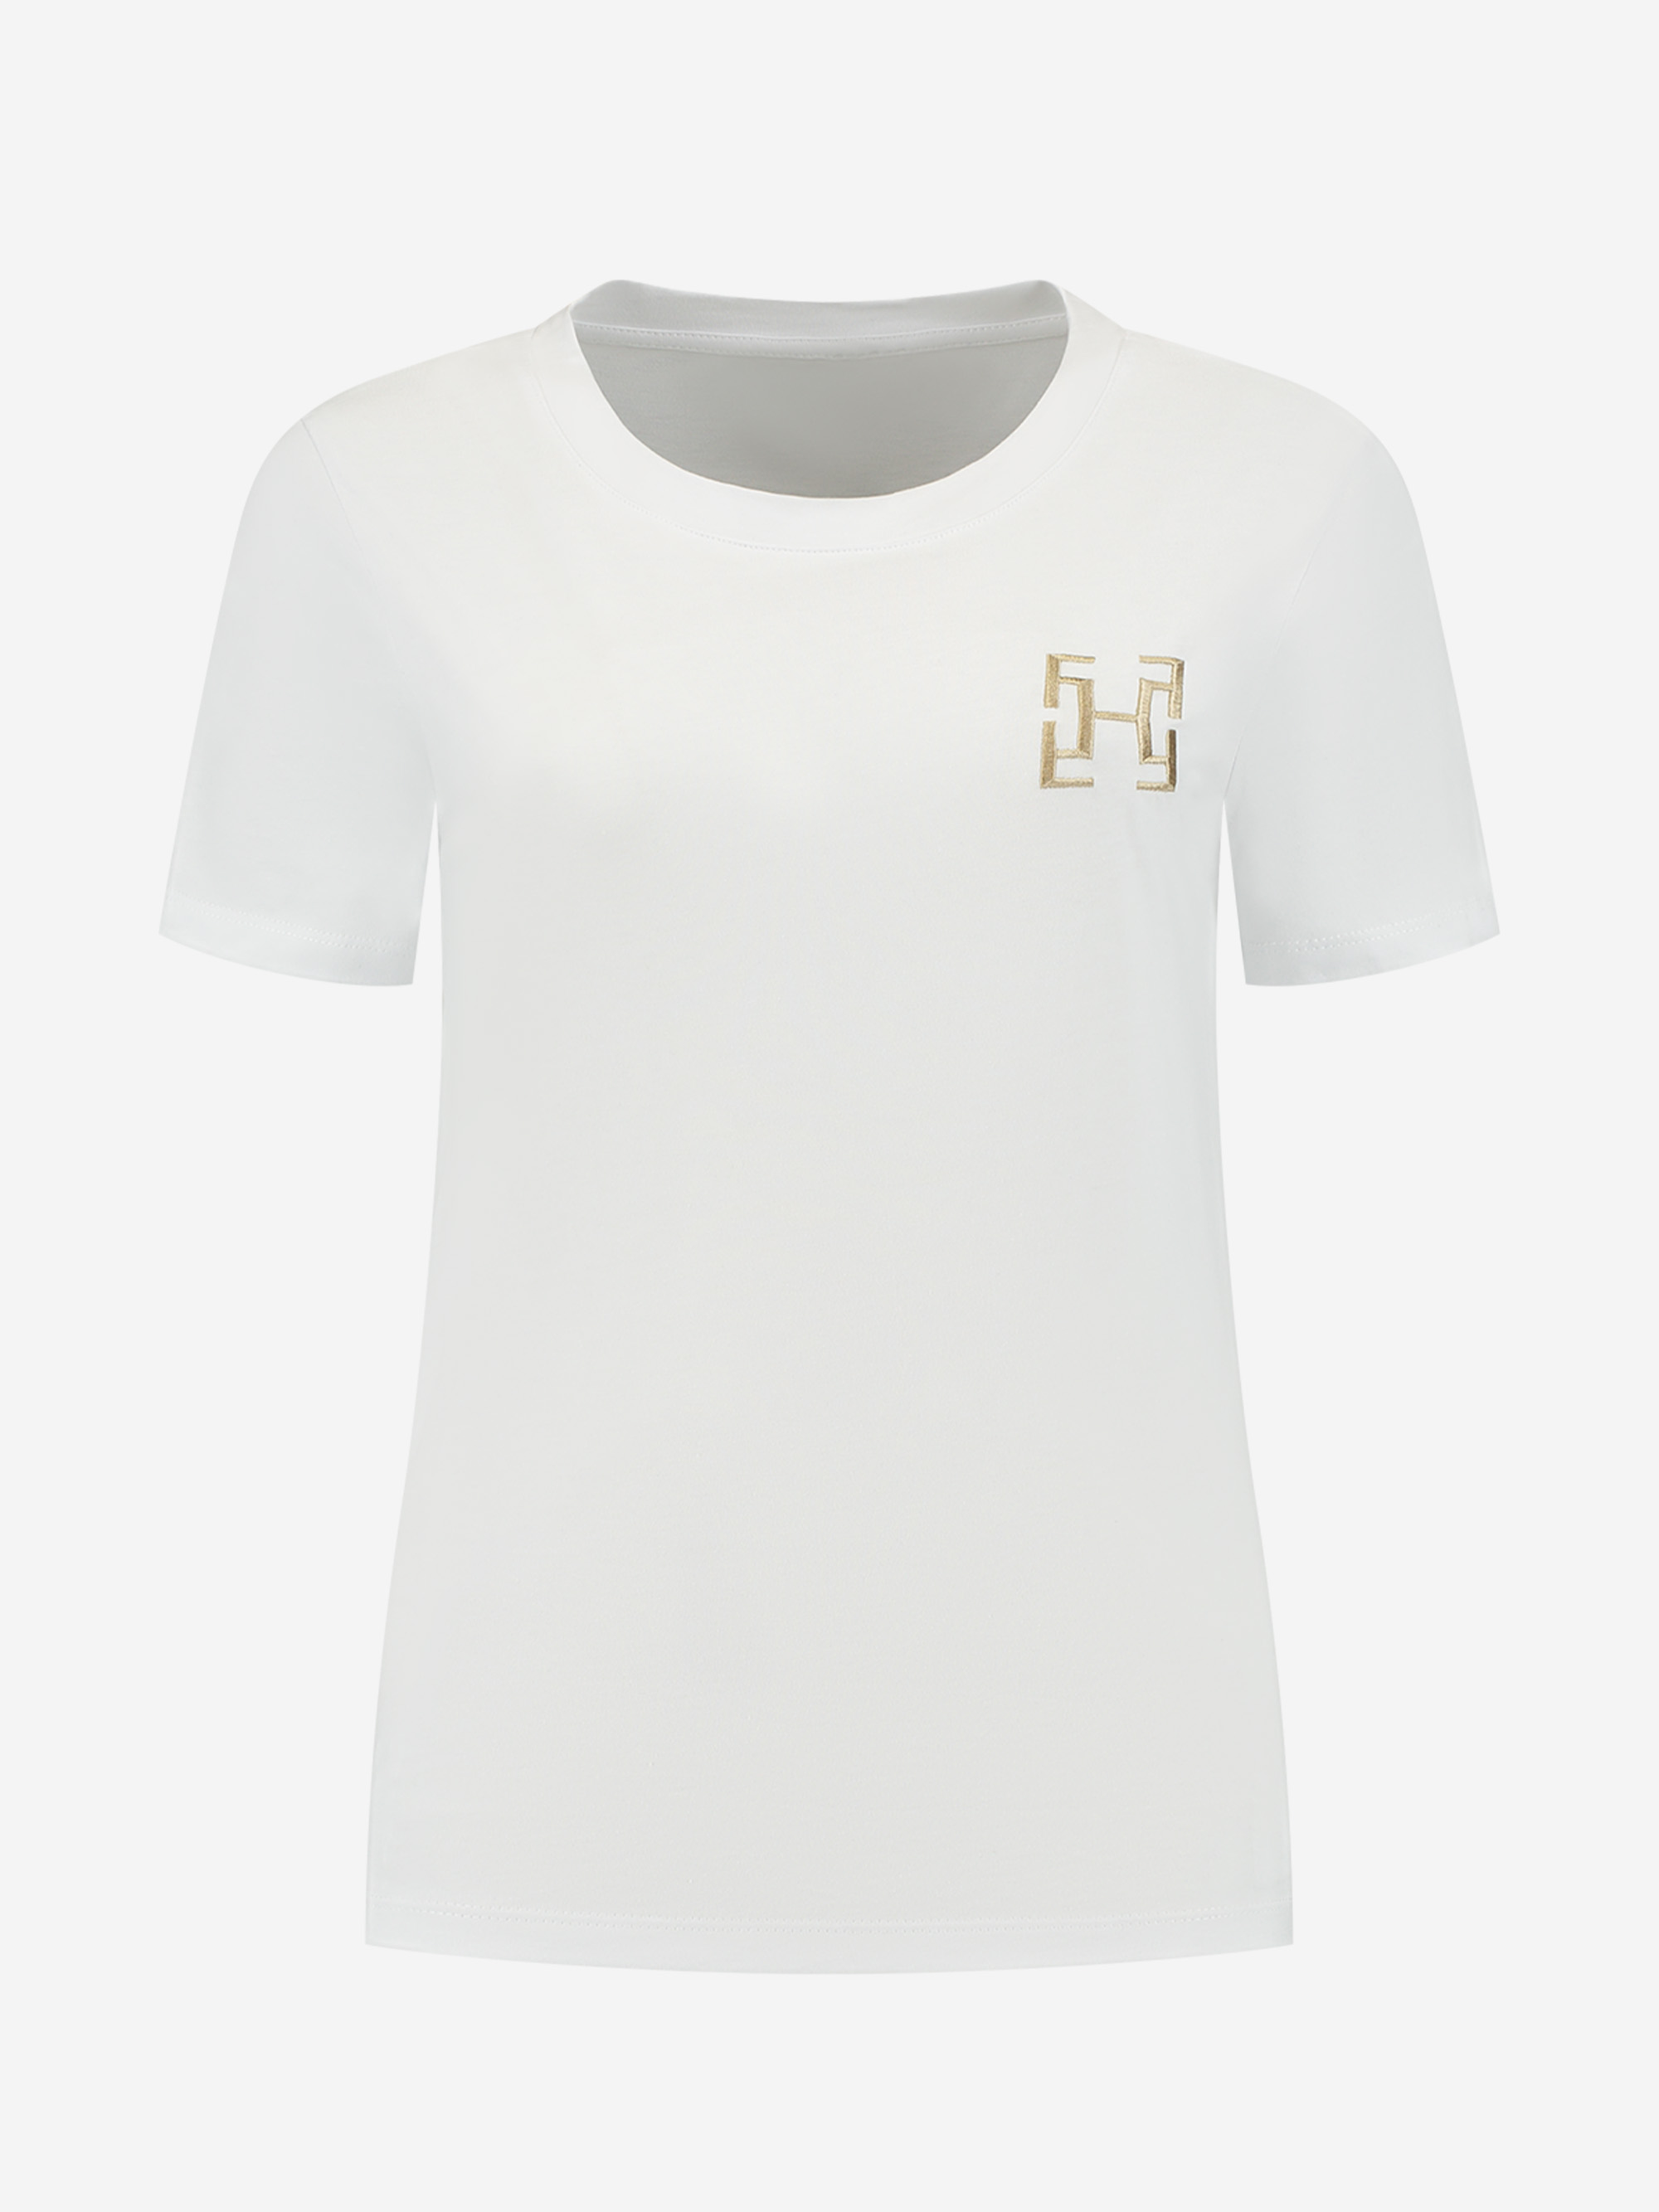 T-shirt with FH logo